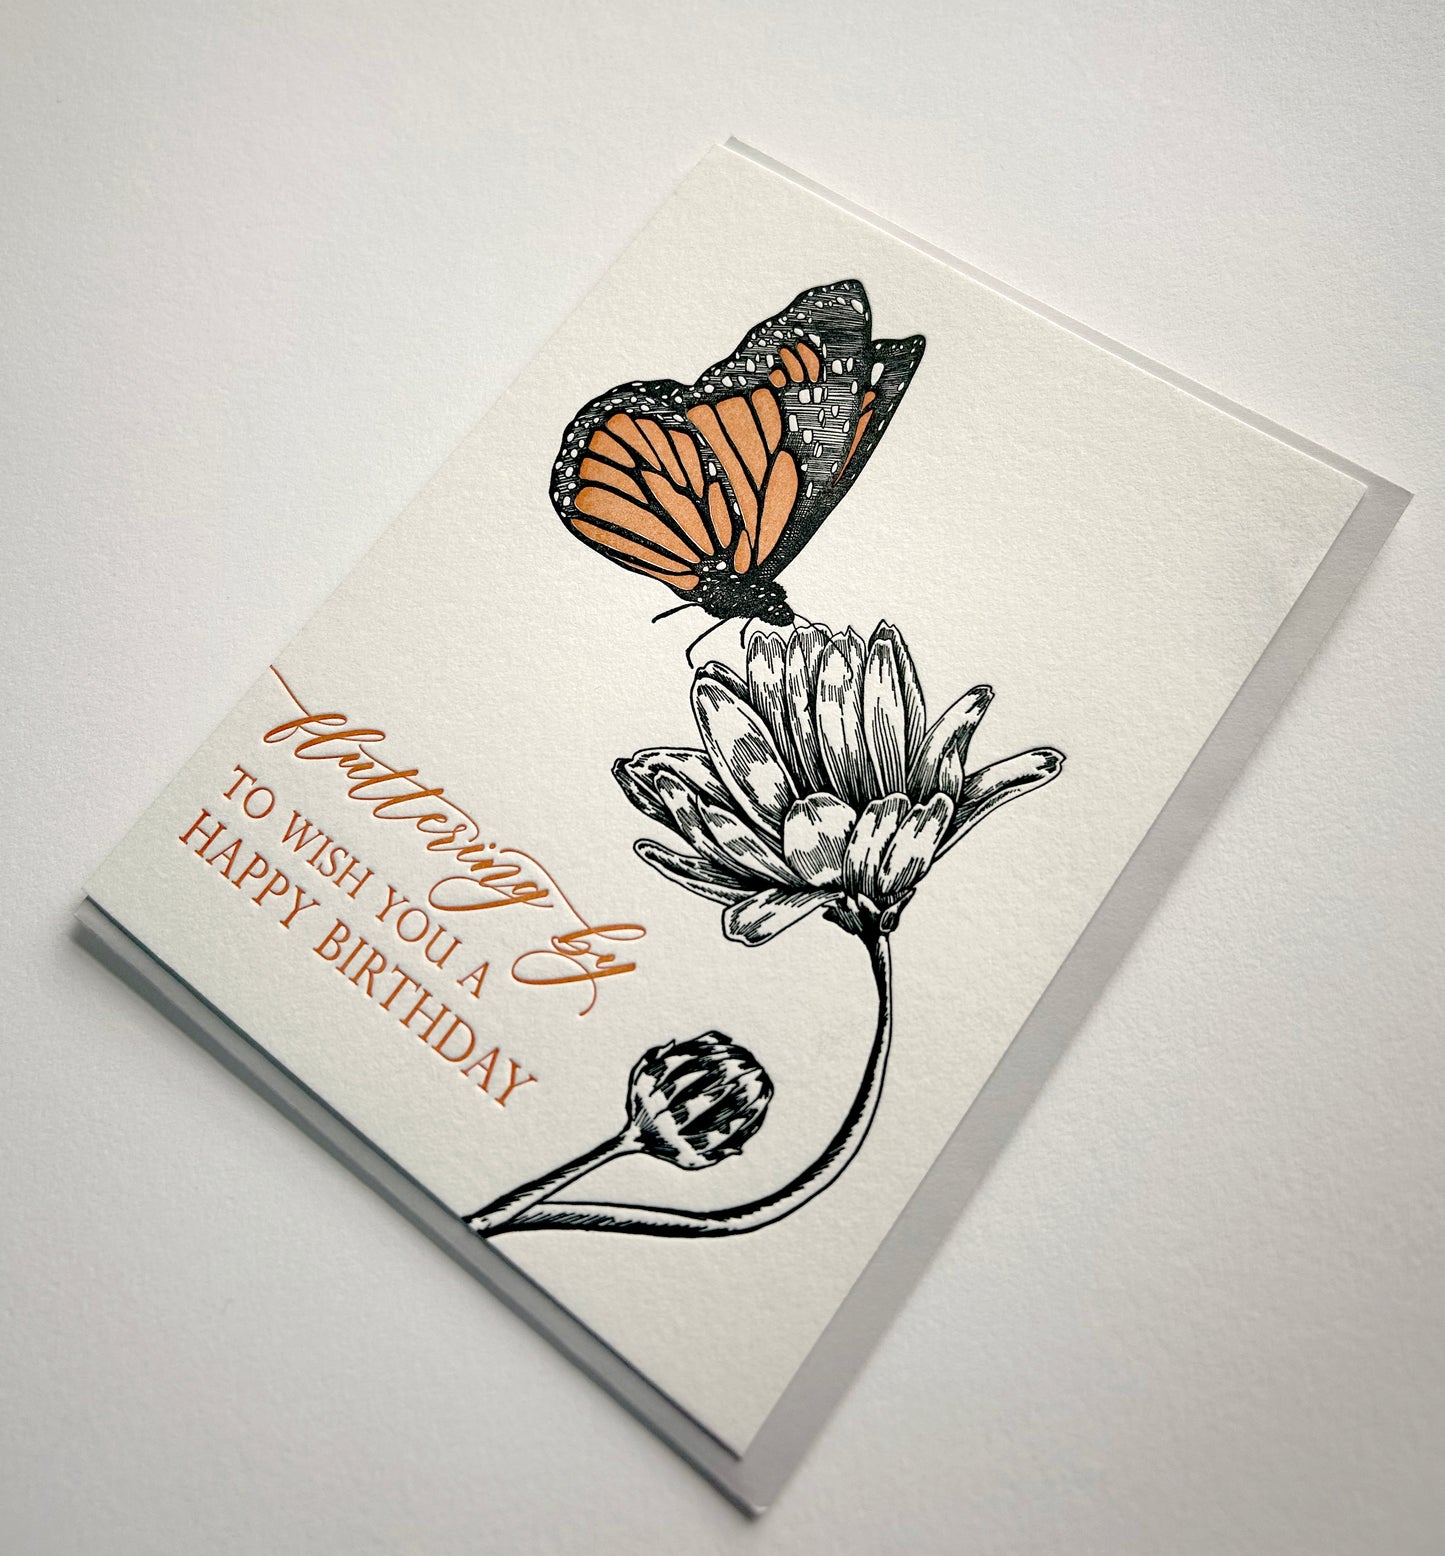 Fluttering By To Wish You A Happy Birthday Letterpress Greeting Card